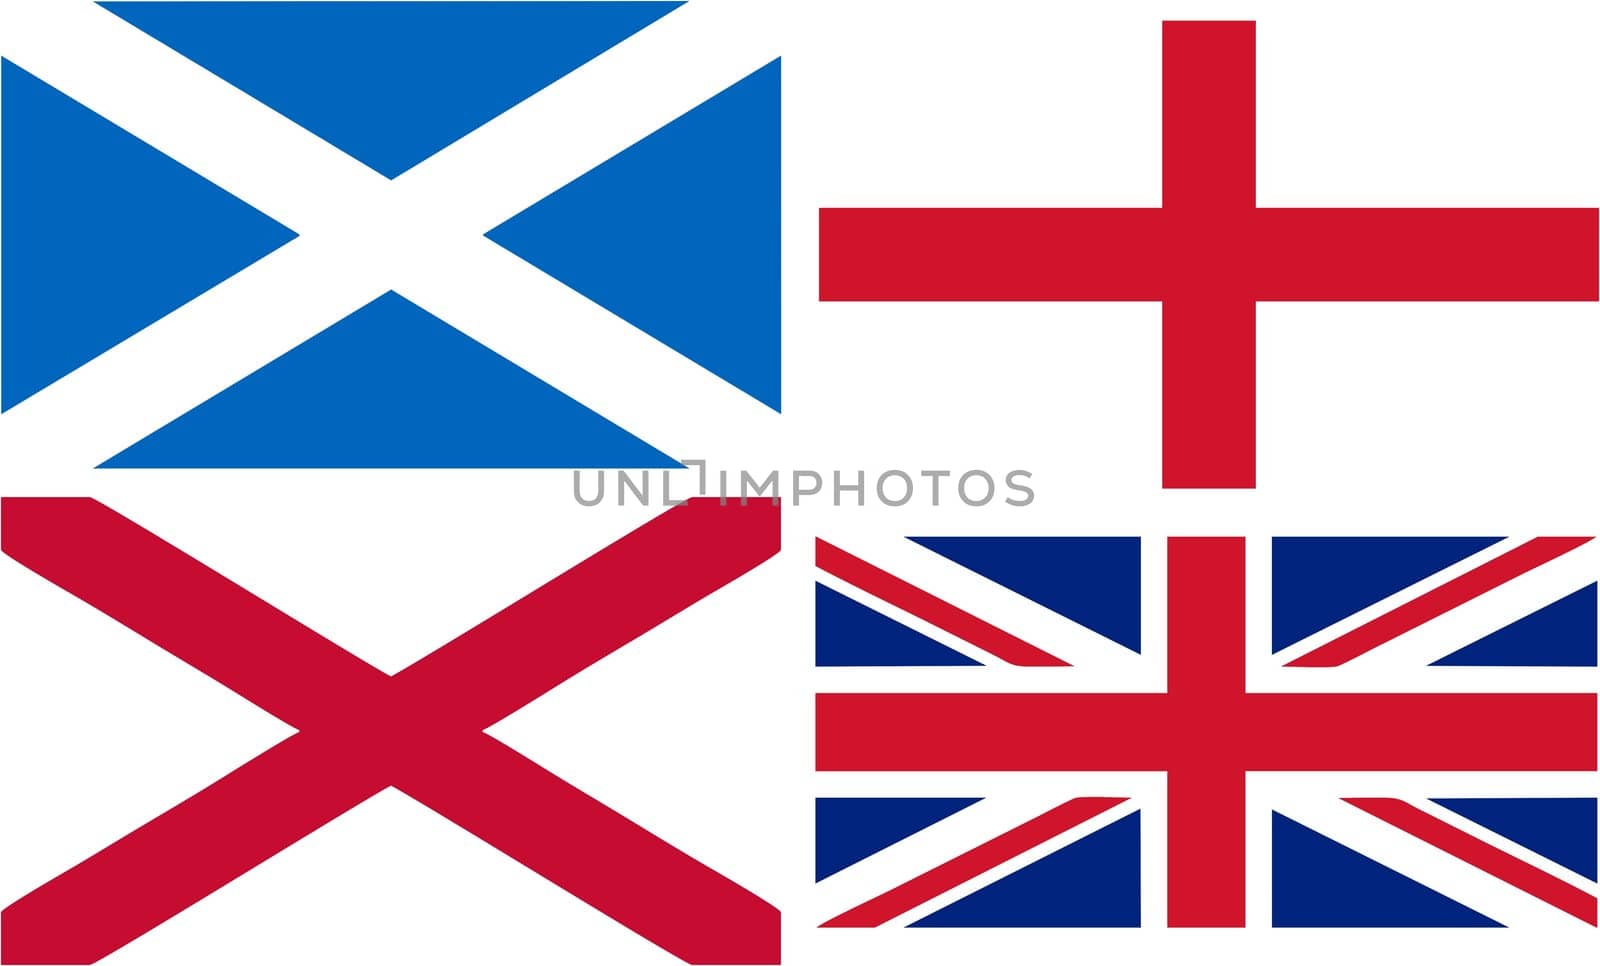 England, Scotland and Wales flags to form the Union Jack - isolated vector illustration